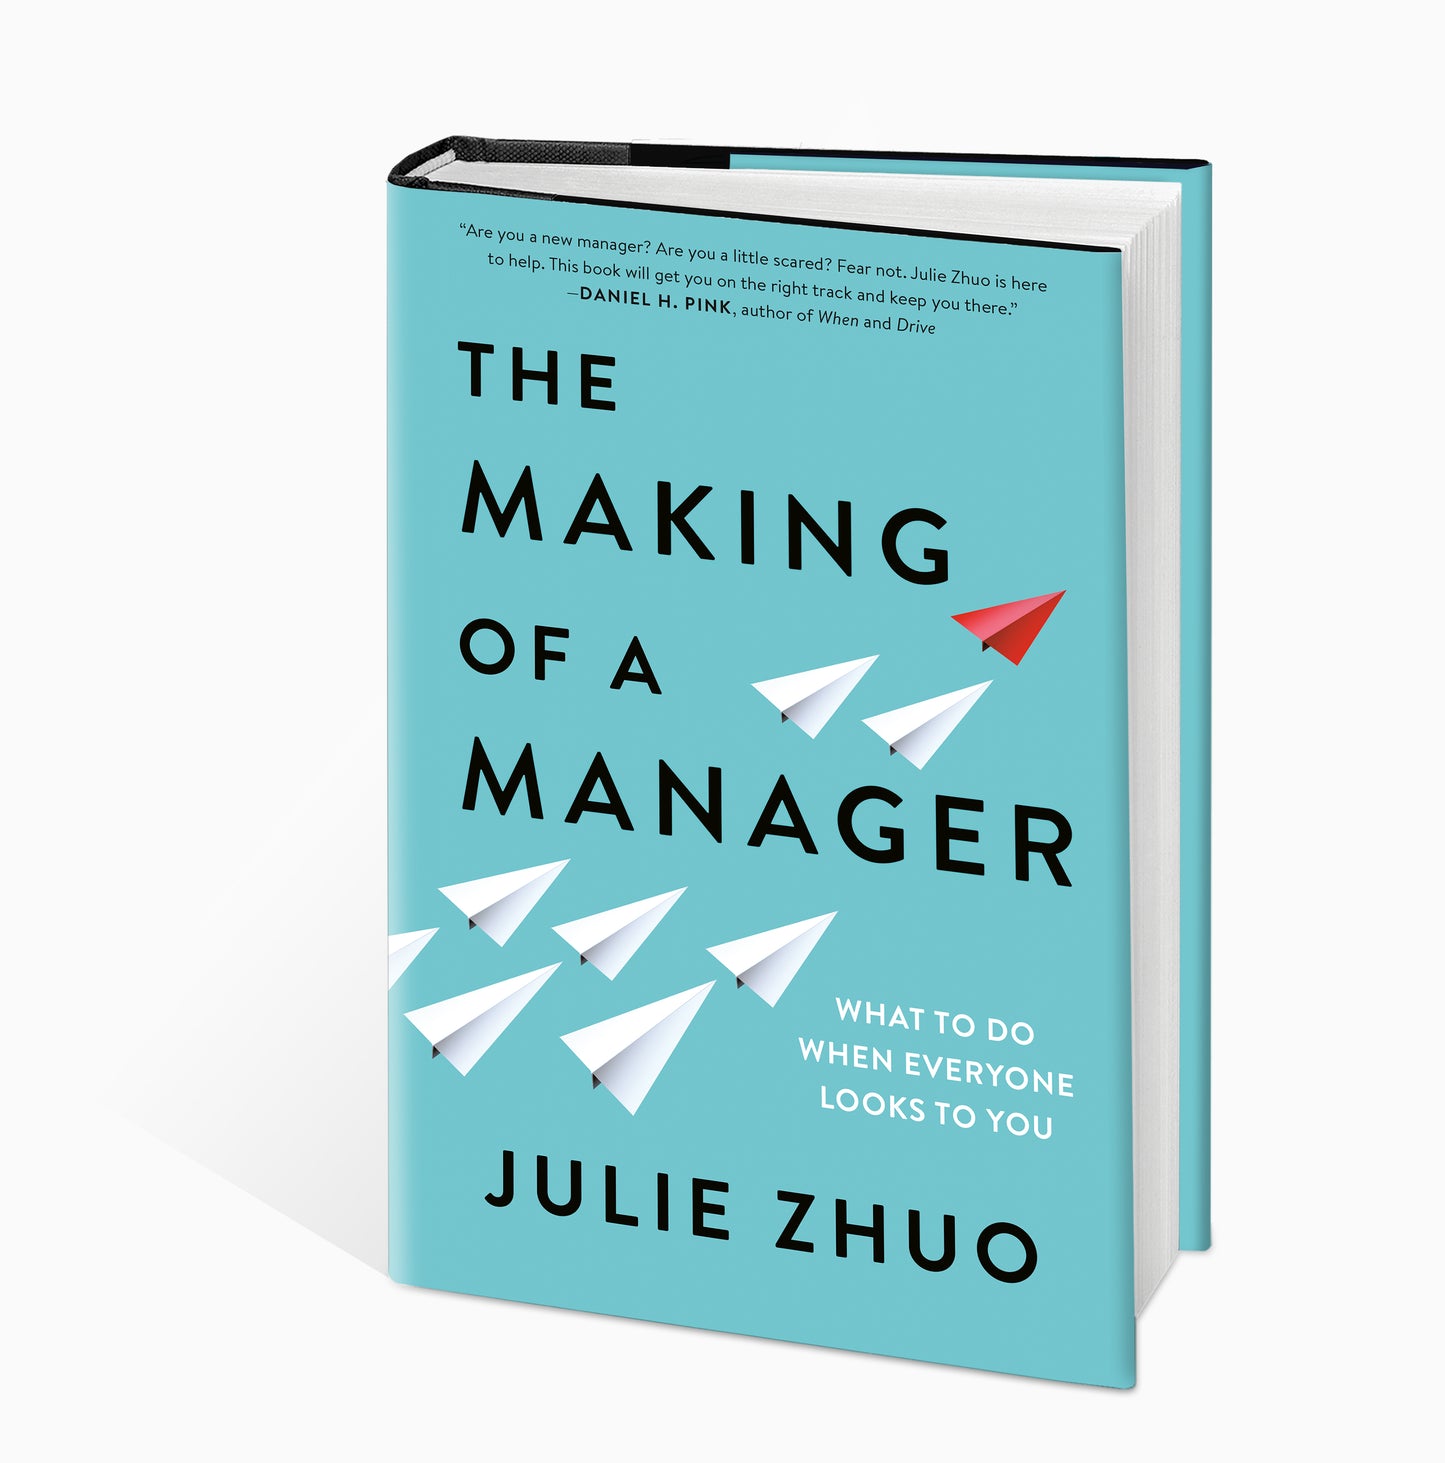 The Making of a Manager: What to Do When Everyone Looks to You - Julie Zhou